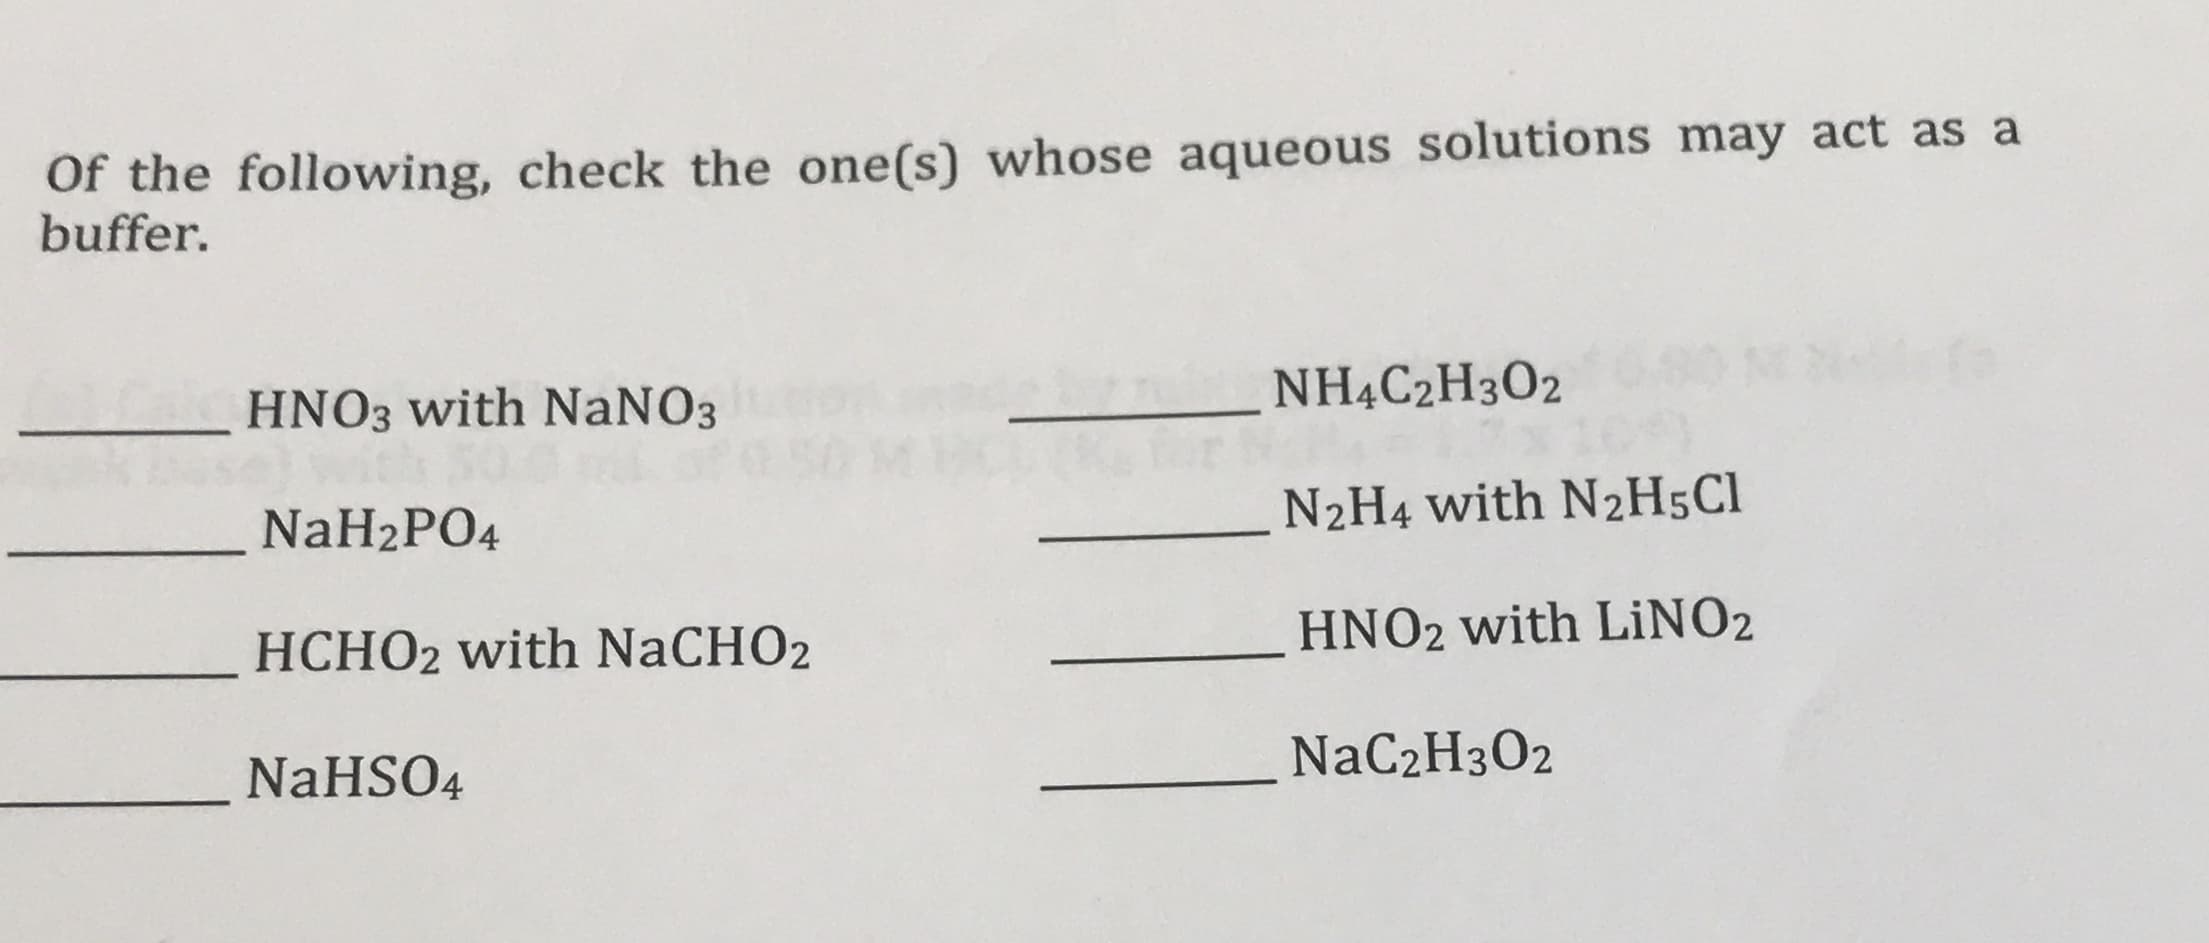 Of the following, check the one(s) whose aqueous solutions may act as a
buffer.
NHẠC2H3O2
HNO3 with NaNO3
N2H4 with N2H5C1
NaH2PO4
HNO2 with LİNO2
HCHO2 with NaCHO2
NaC2H3O2
NaHSO4
